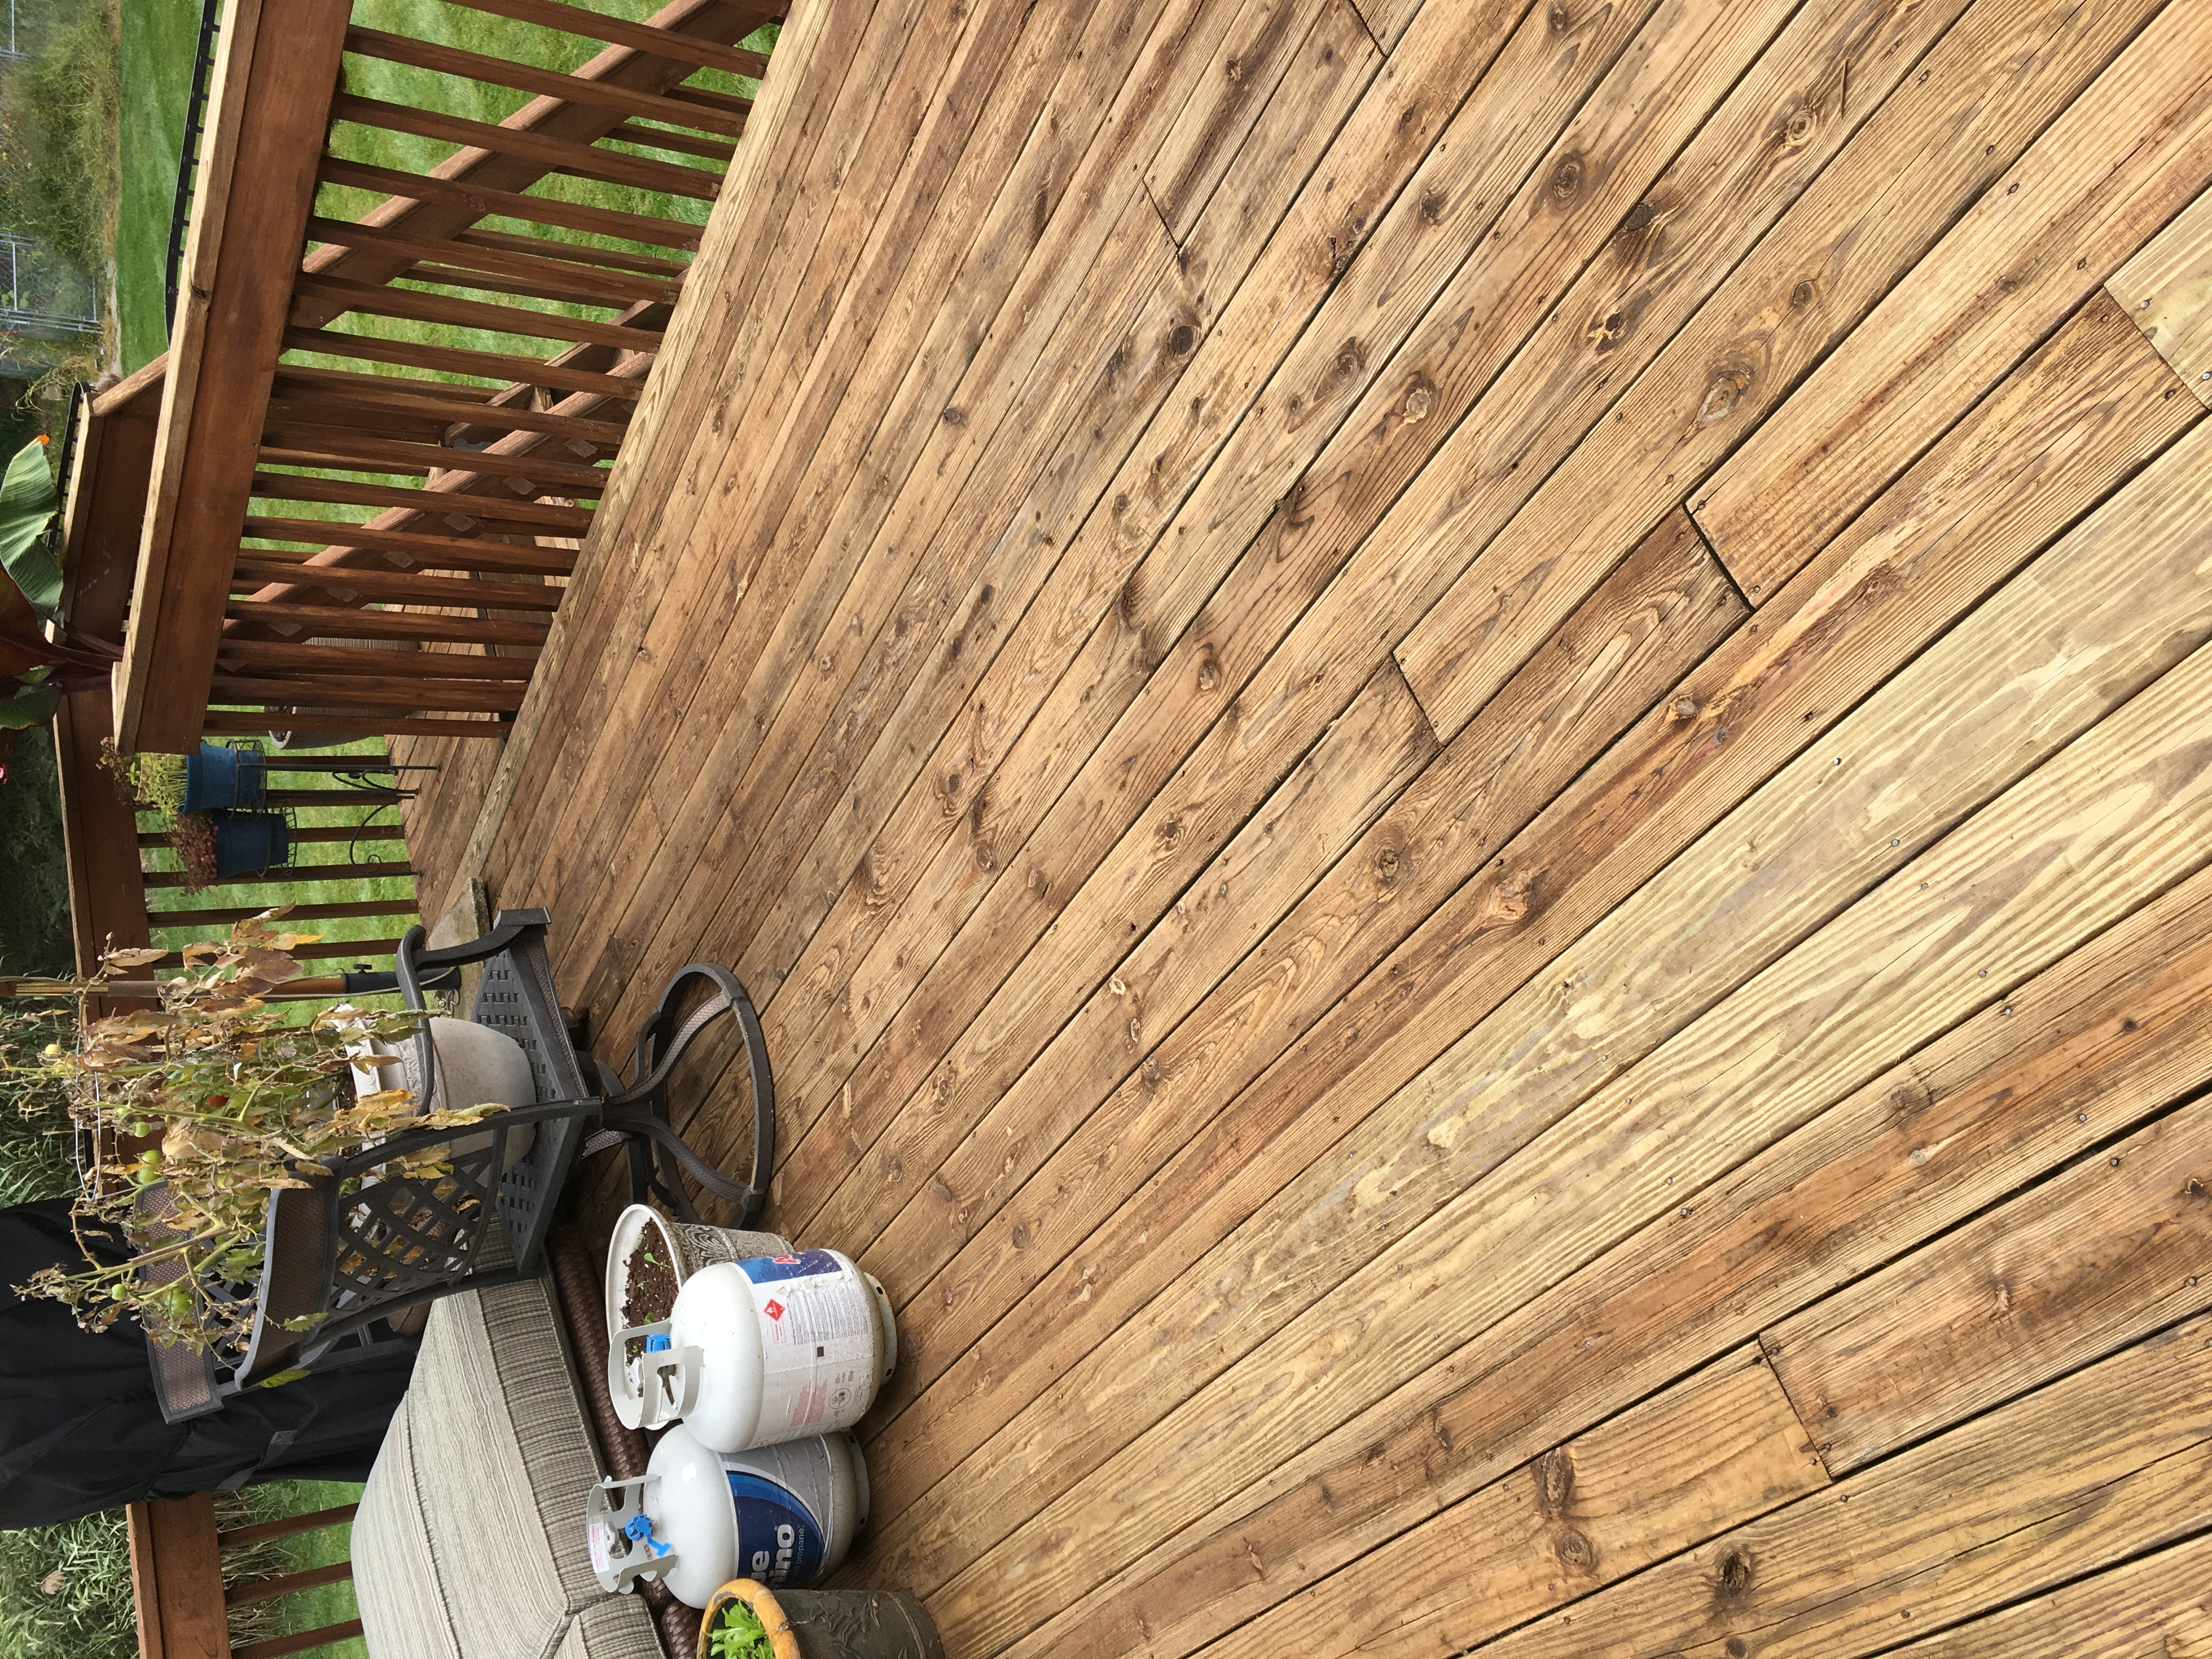 Best Stain For An Old Deck Best Deck Stain Reviews Ratings in size 4032 X 3024